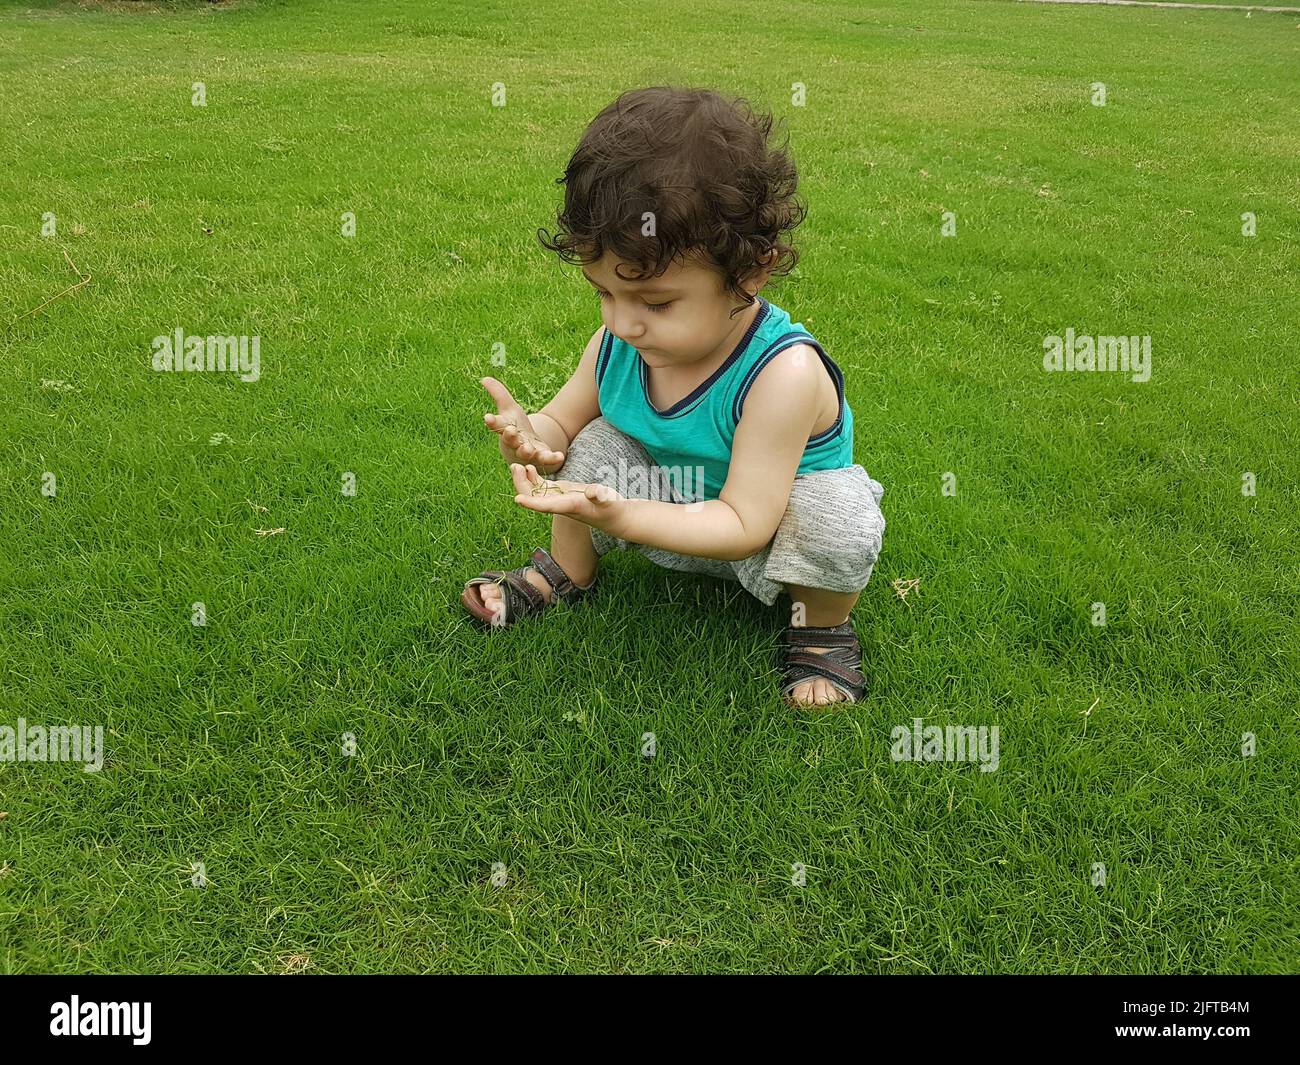 Cute little baby boy playing outdoor on a grass. Stock Photo